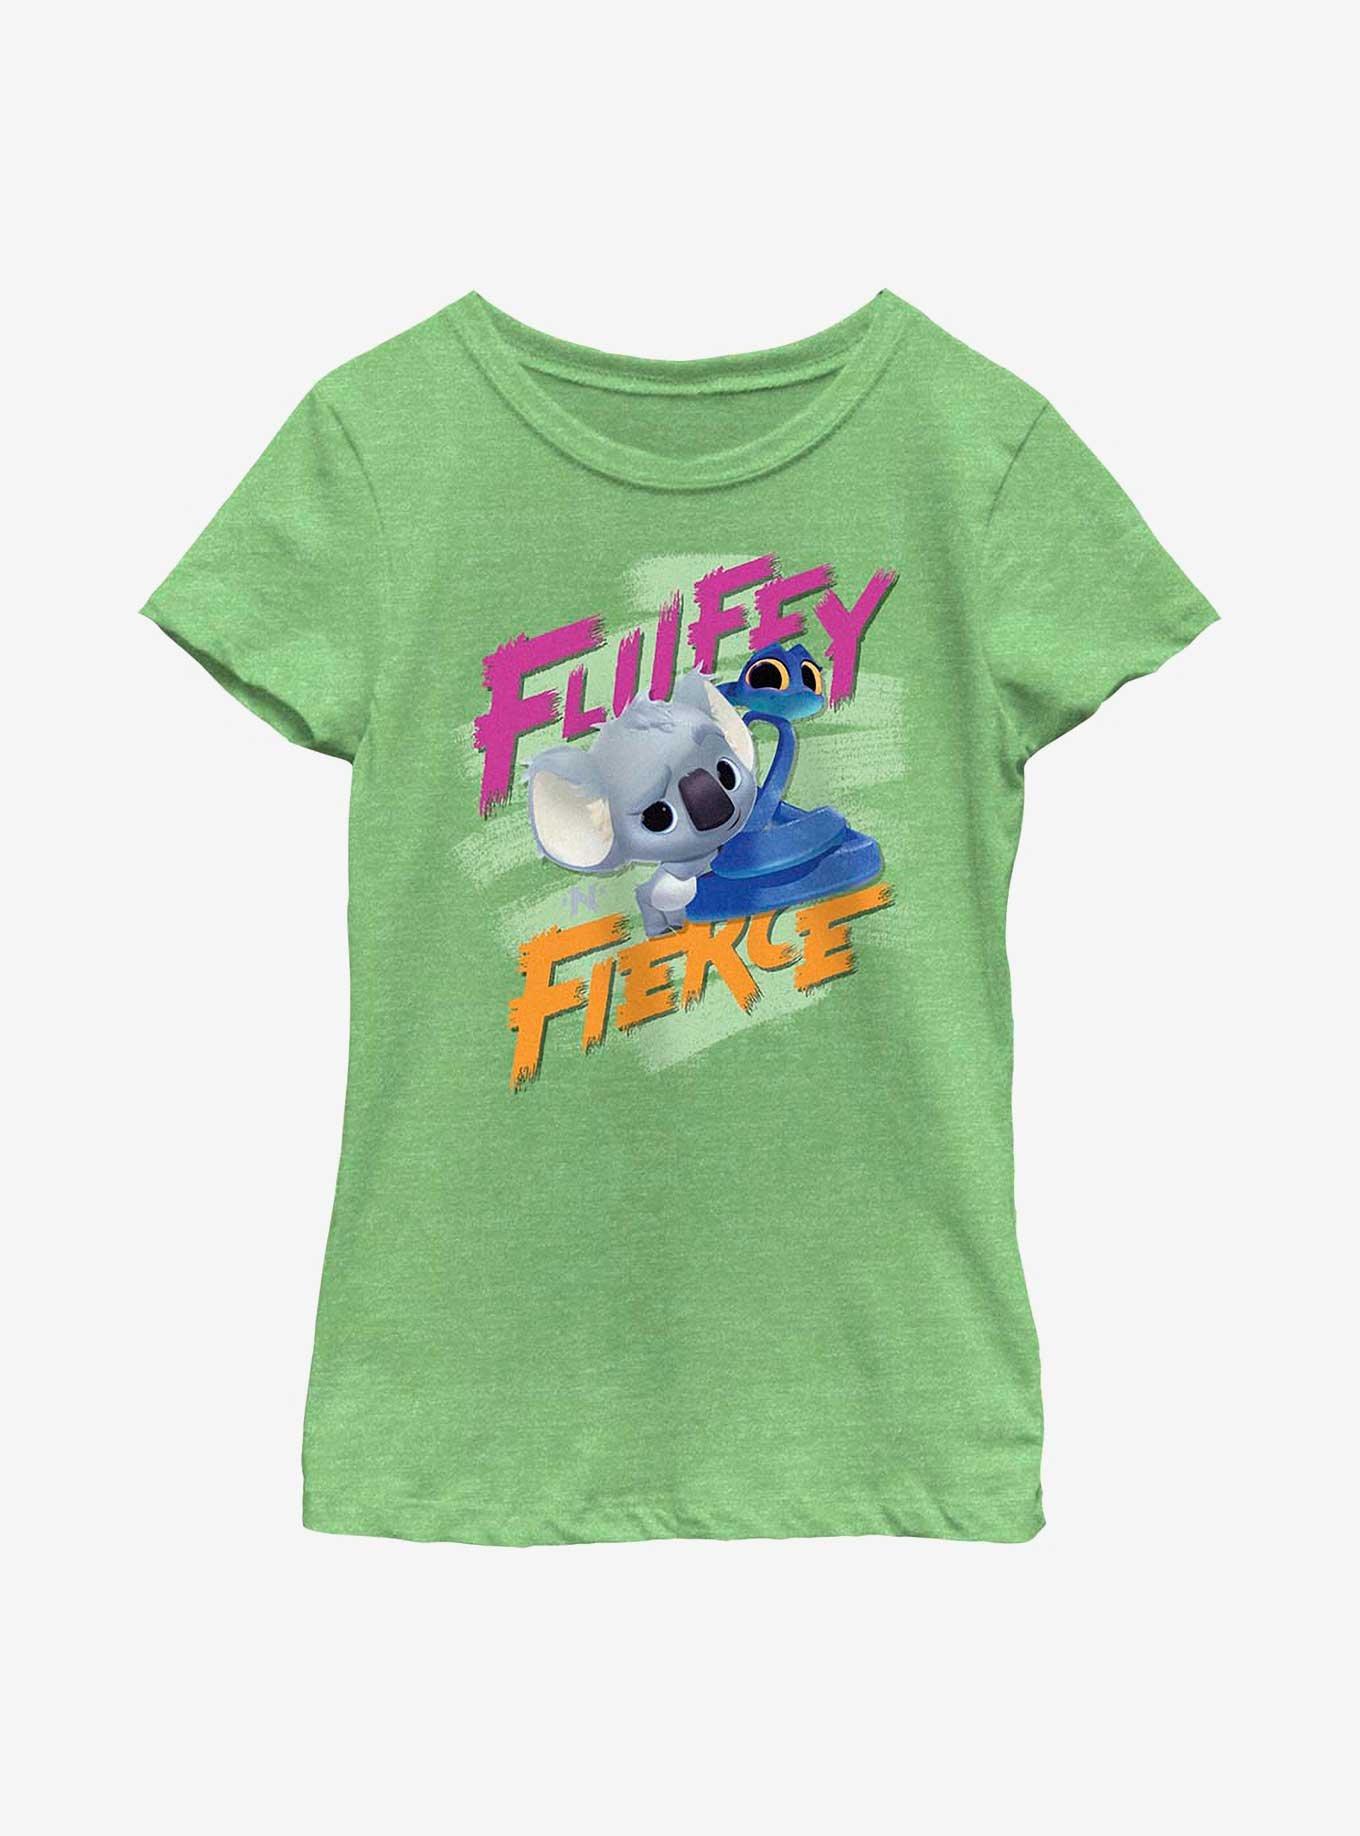 Back To The Outback Fluffy N Fierce Youth Girls T-Shirt, GRN APPLE, hi-res